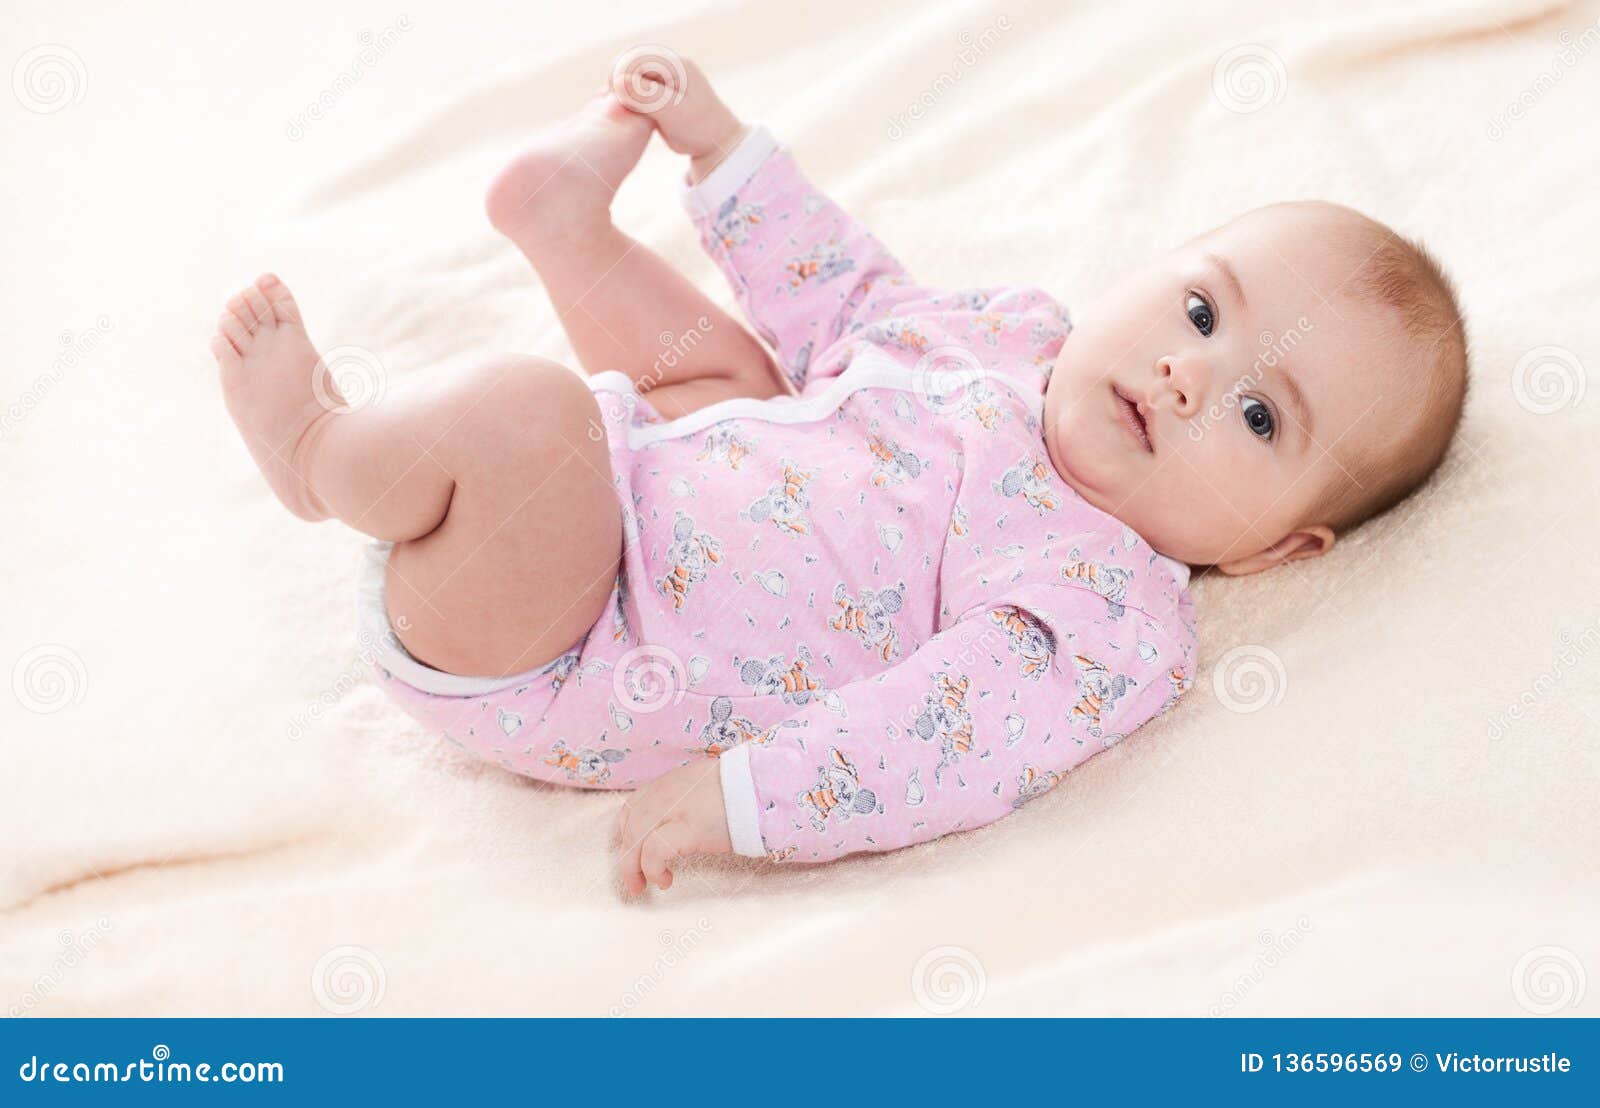 Children, People, Infancy and Age Concept - Beautiful Happy Baby ...